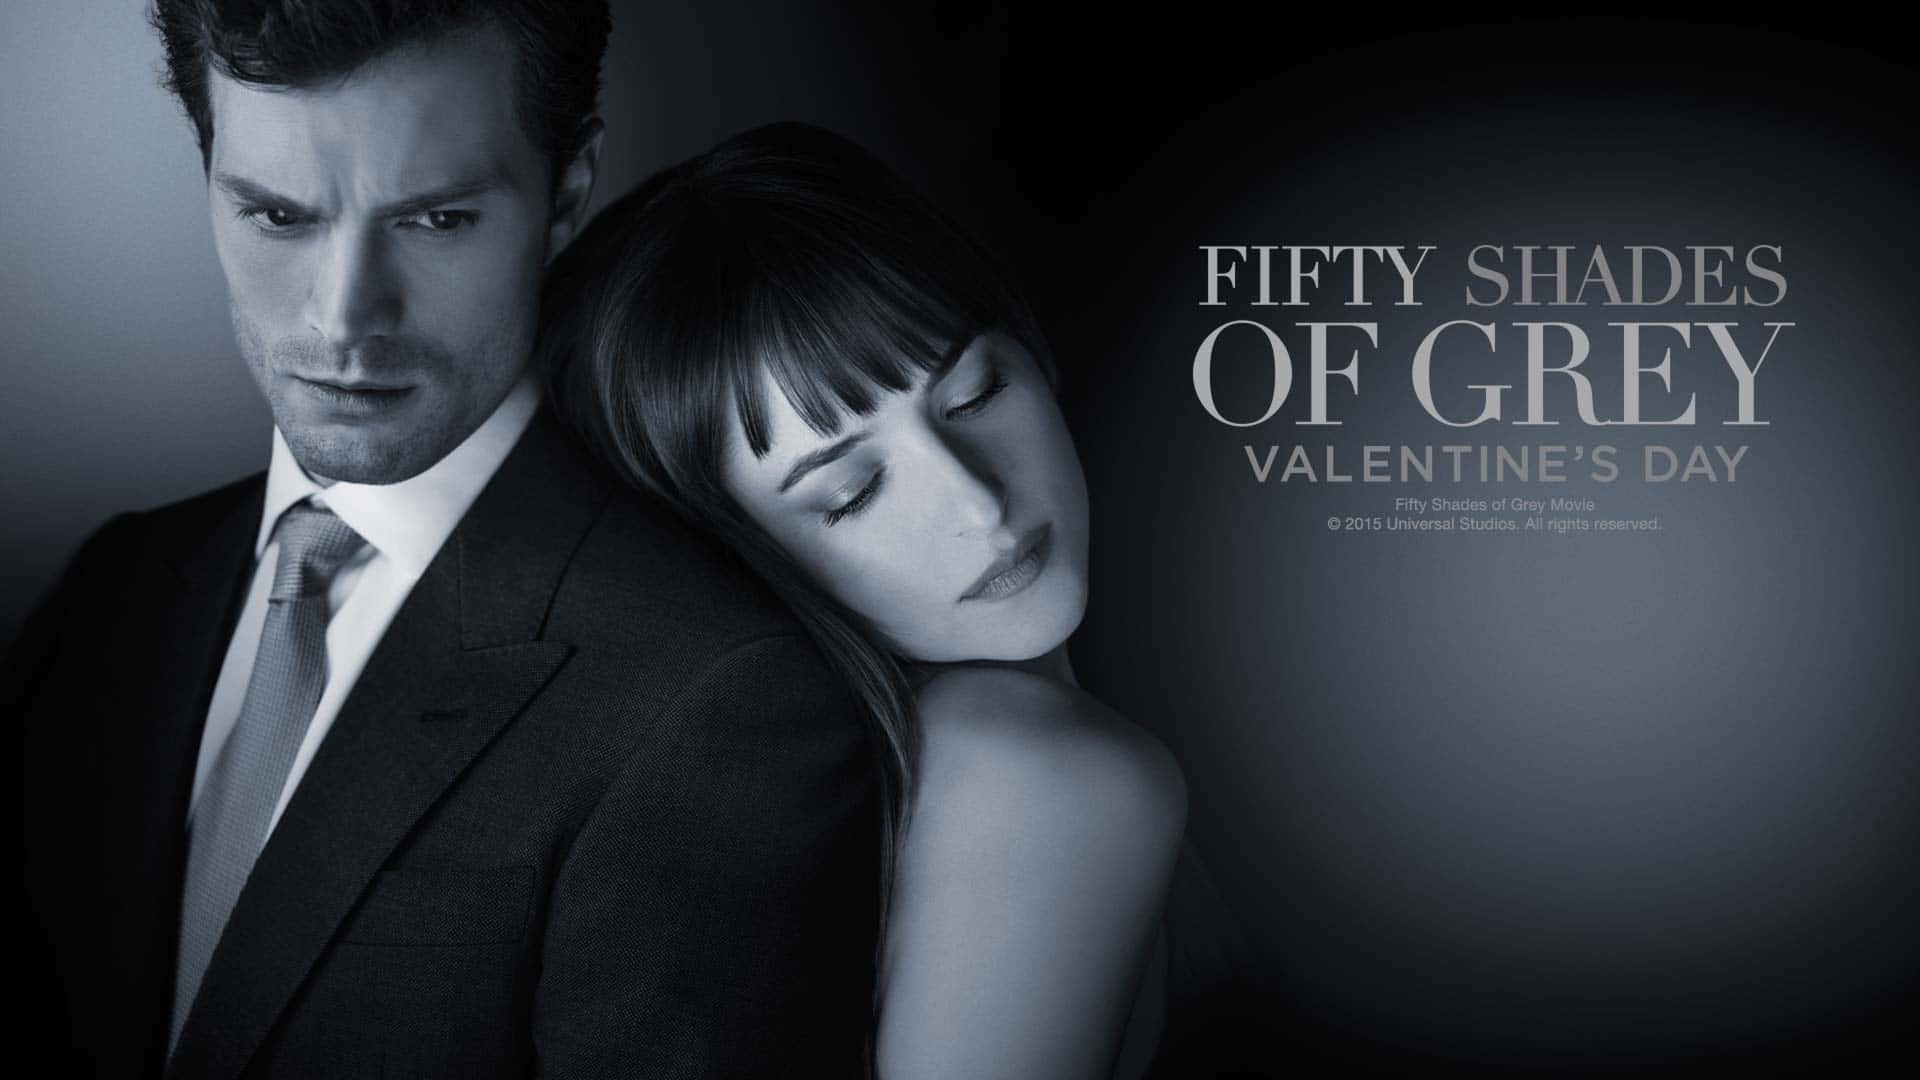 Fifty Shades Of Grey Promotional Poster Background